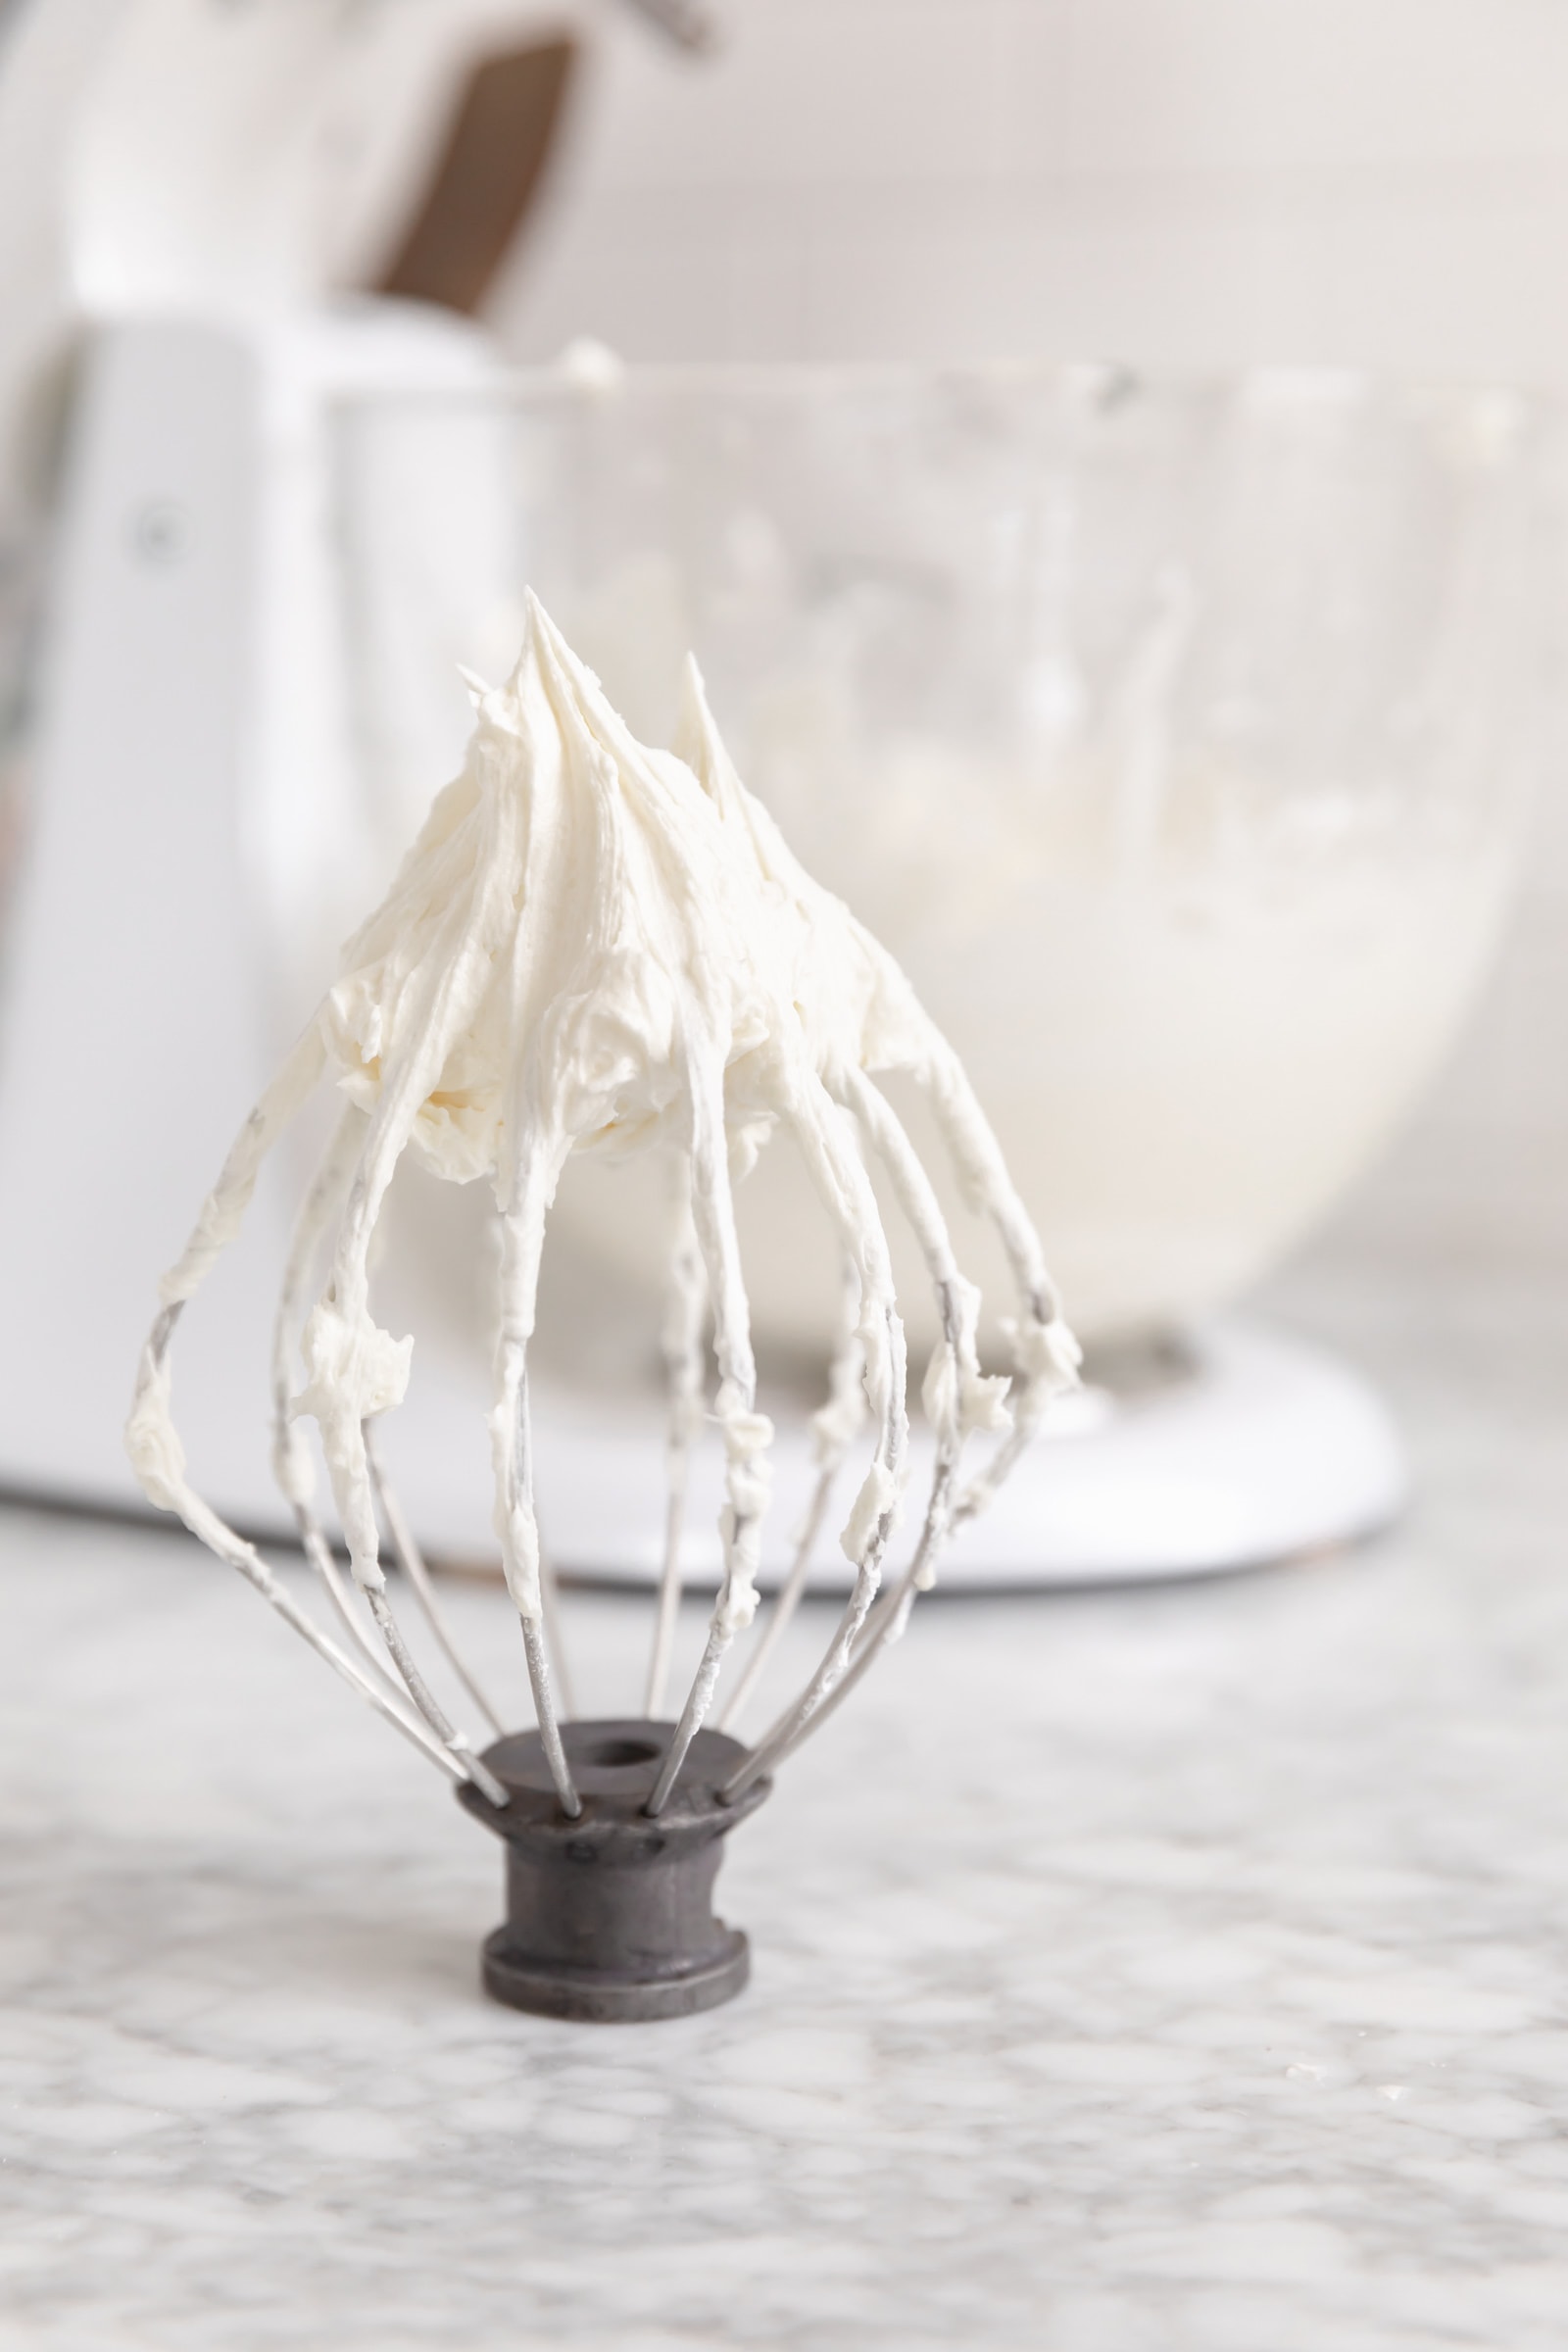 cream cheese frosting on a whisk